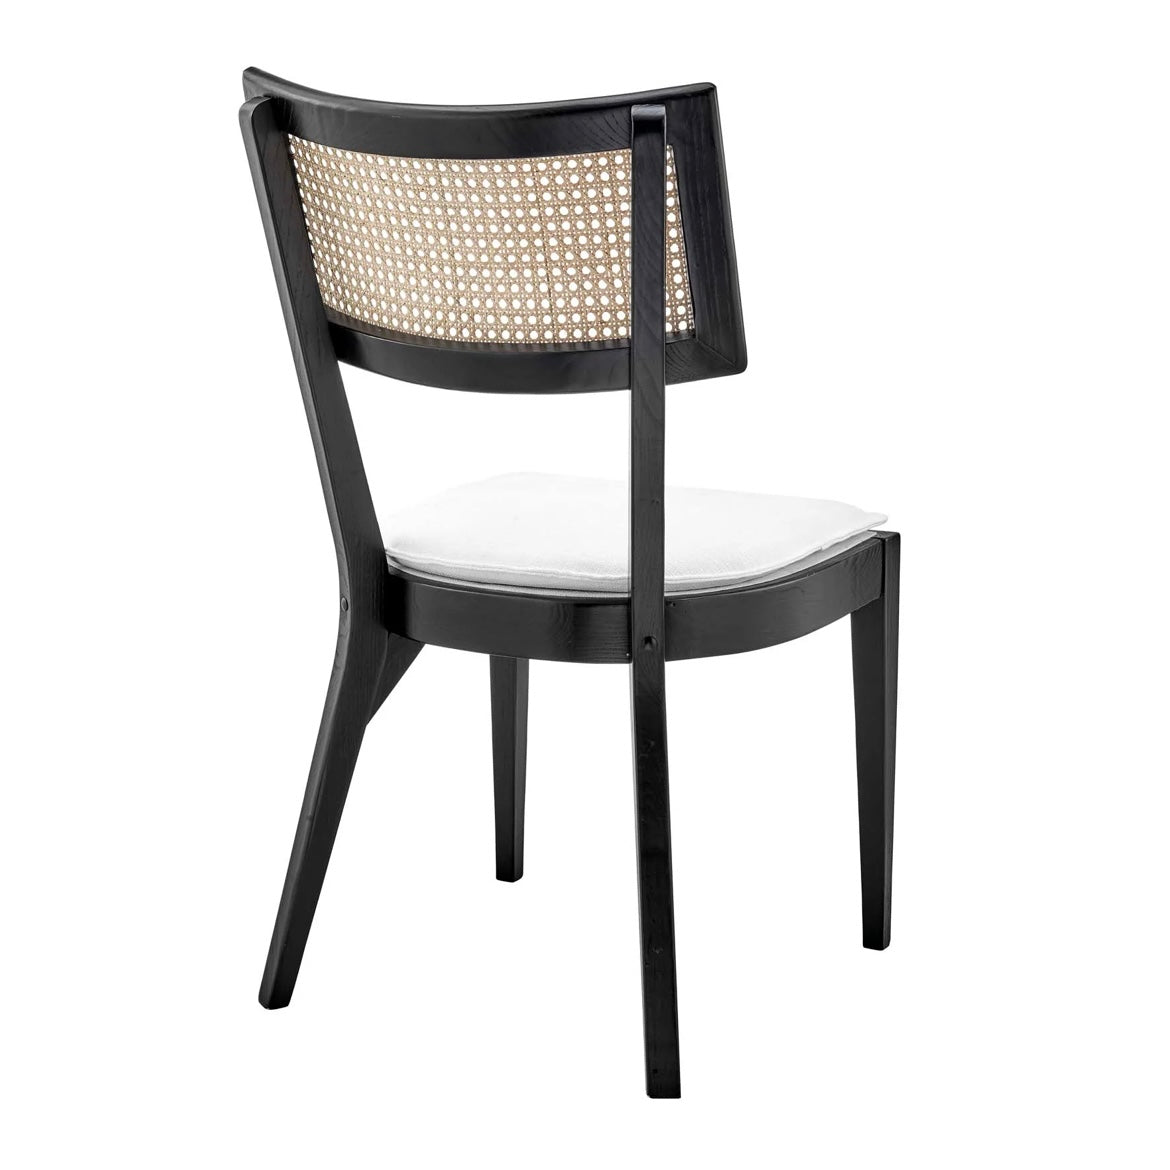 Caledonia Wood Dining Chair - White